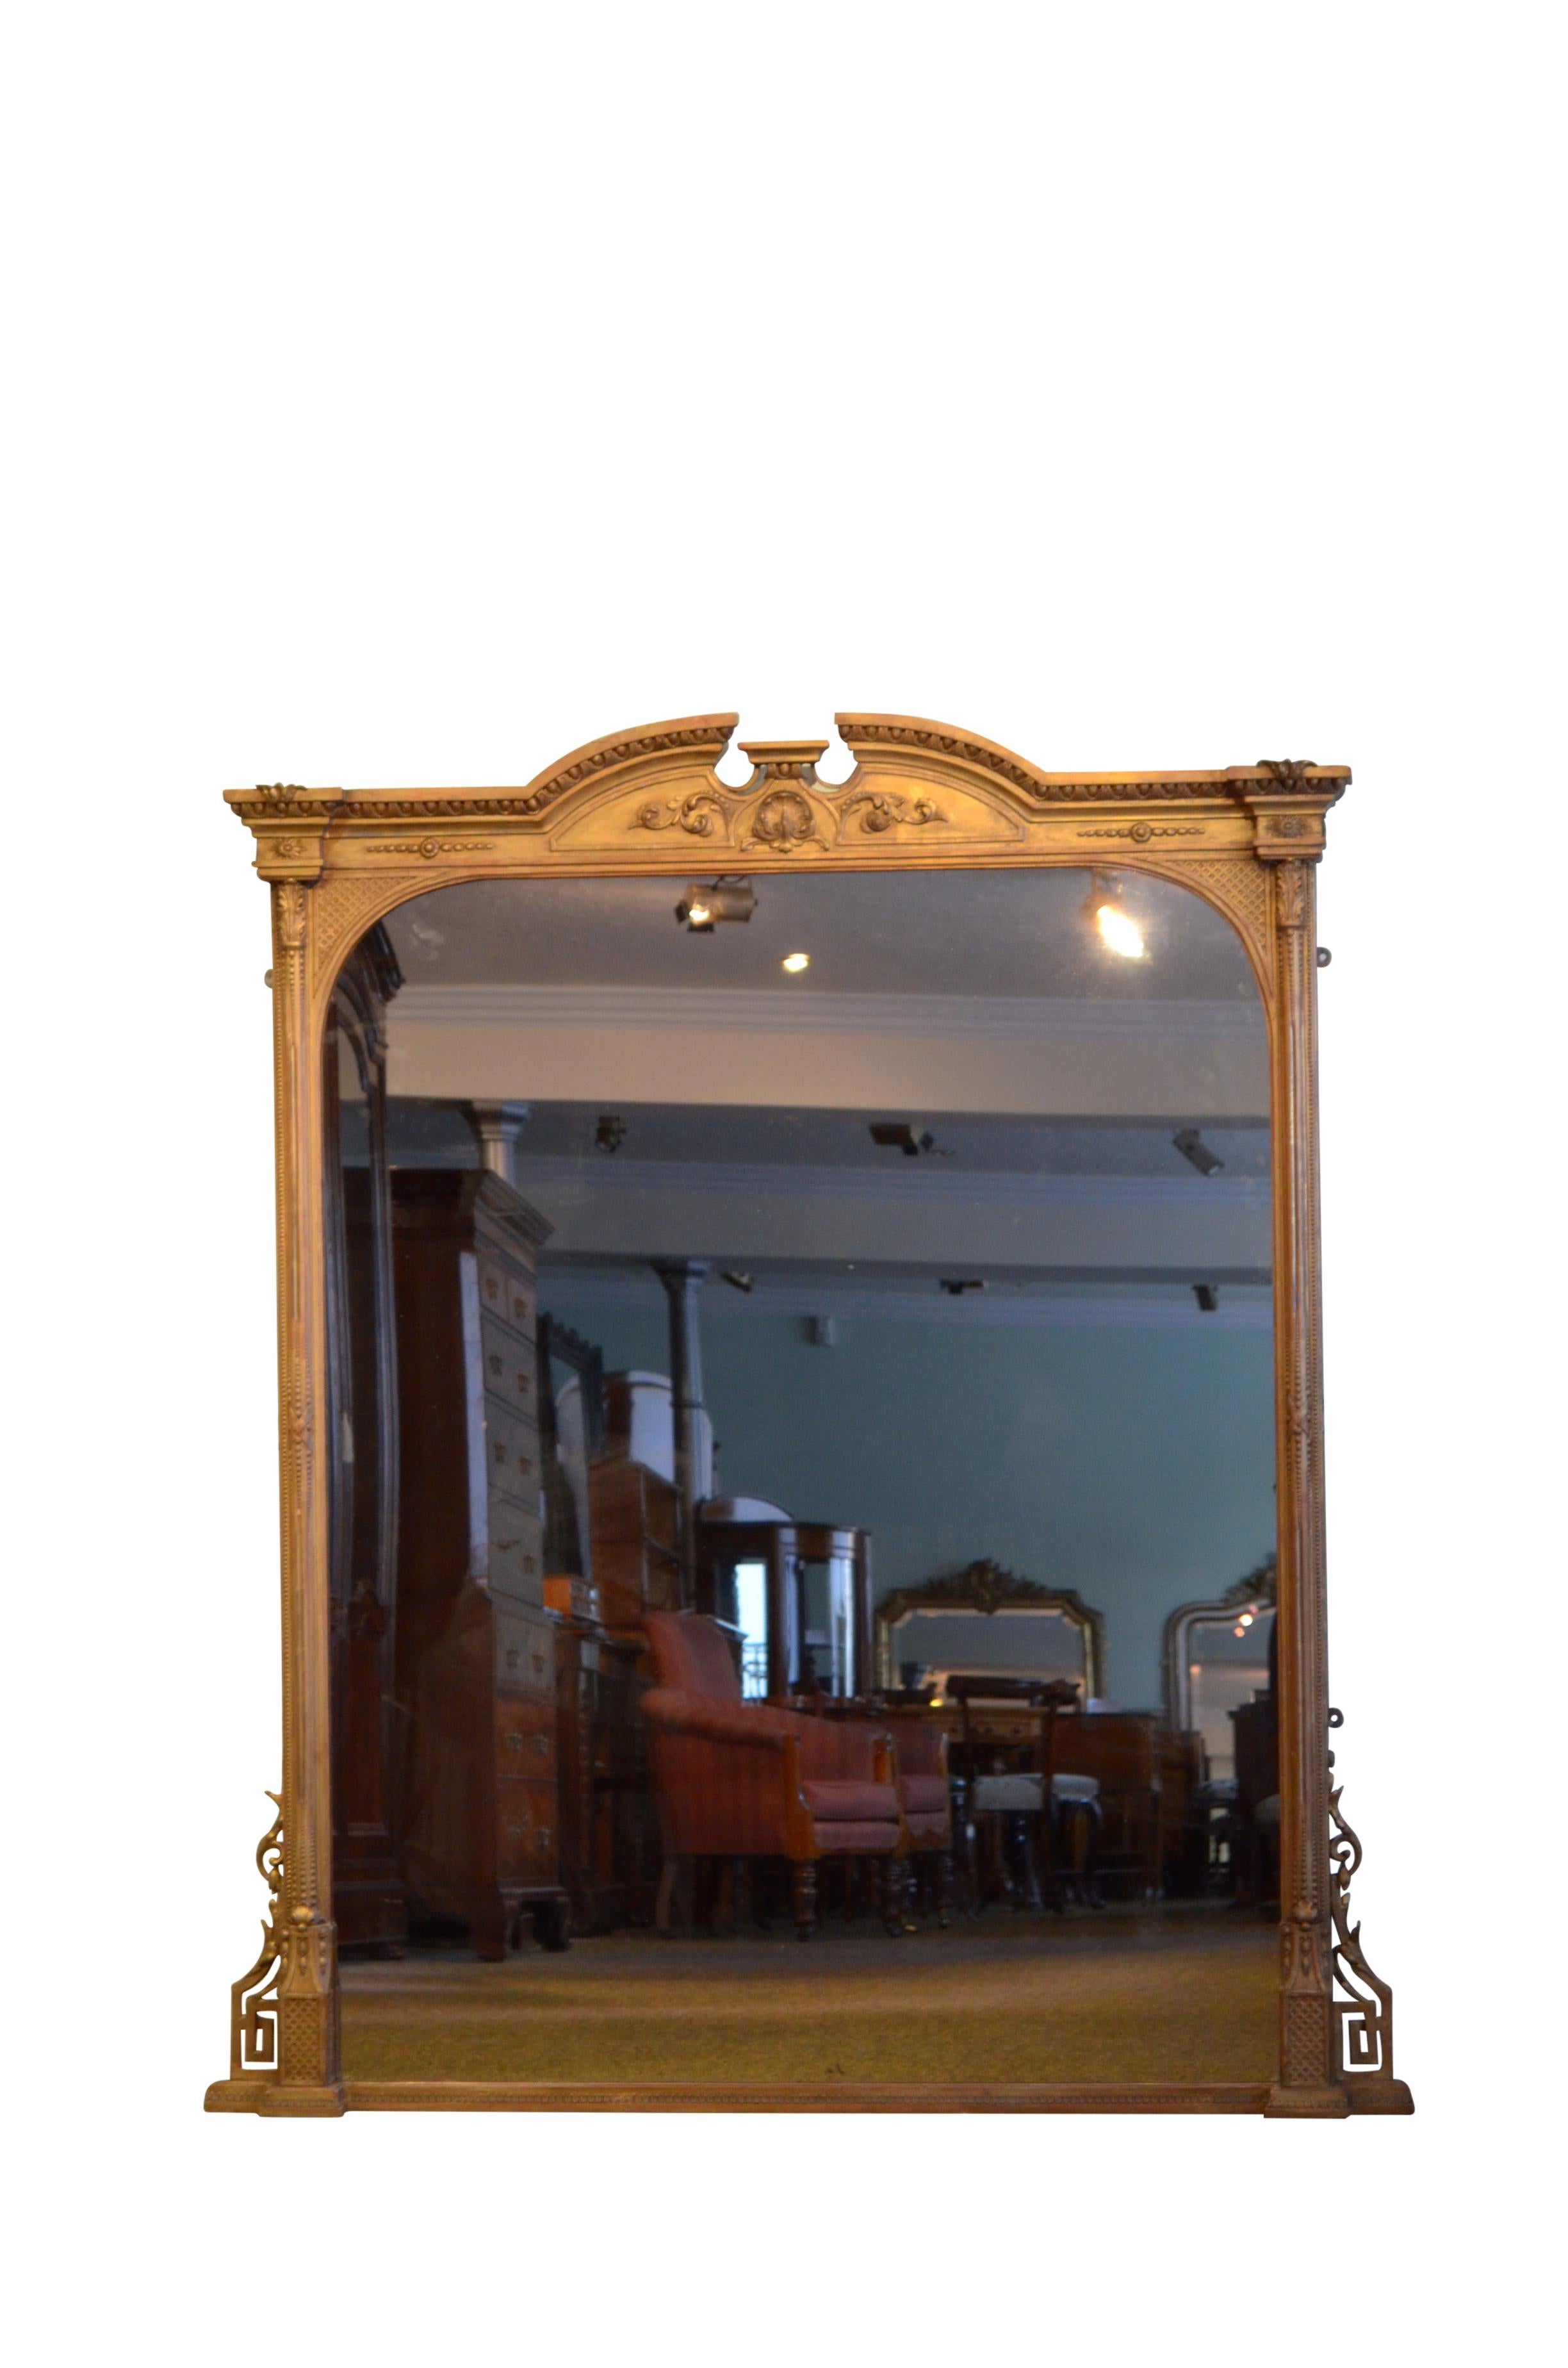 K0574 Superb Victorian overmantle giltwood mirror, having original plate with minor imperceptions in gilded frame with reeded columns, acanthus leaves, floral scrolls, Greek key decoration and egg and dart cornice. This antique mirror retains its